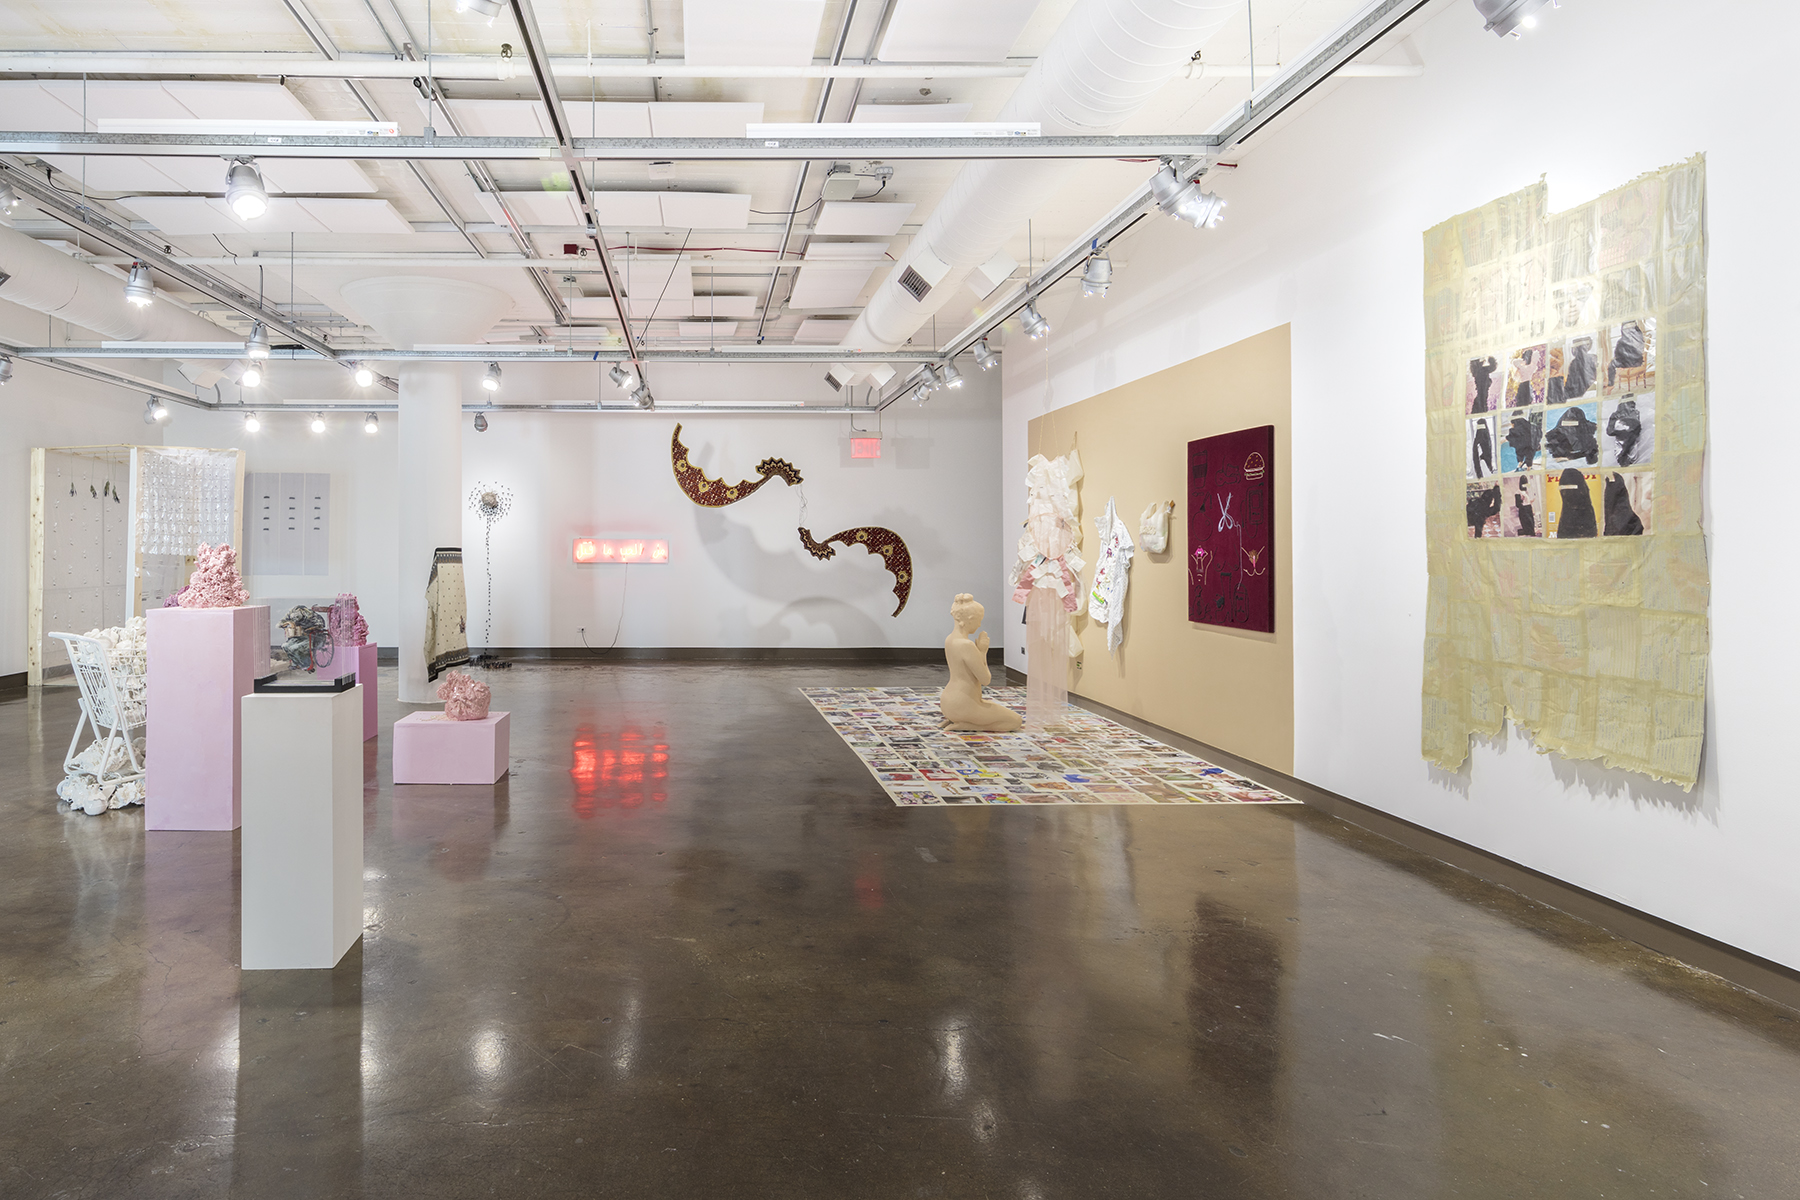 Installation view of the exhibiton titled "The Politics of Identity" at the SVA Chelsea Gallery. The view shows works of sculpture, painting, and mixed-media pieces spread throughout the room.